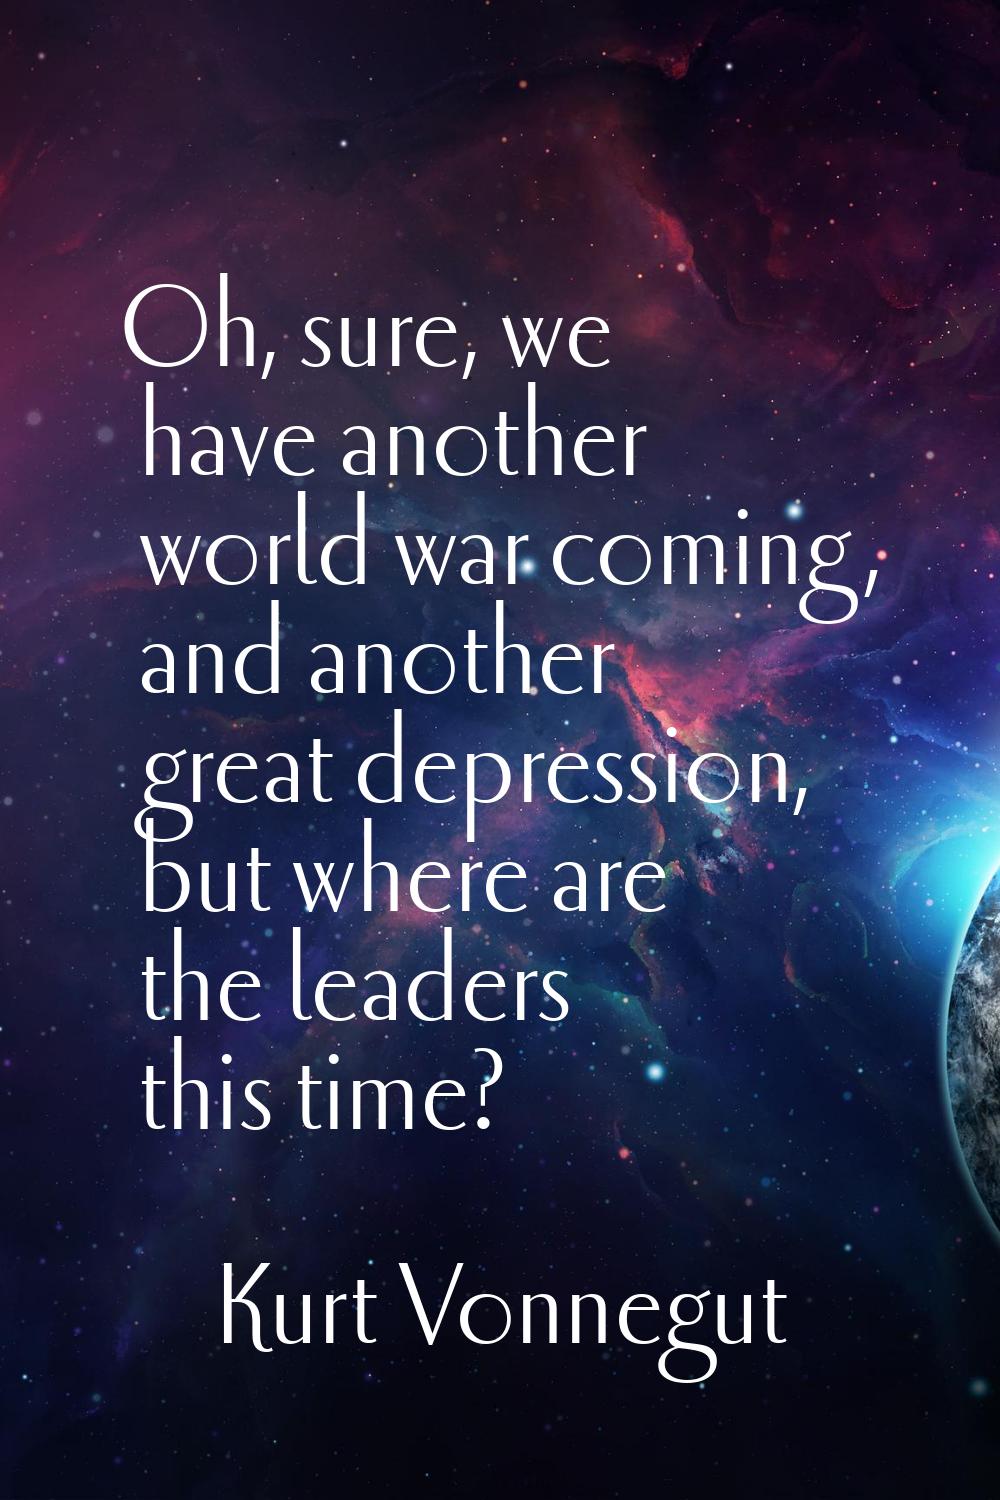 Oh, sure, we have another world war coming, and another great depression, but where are the leaders